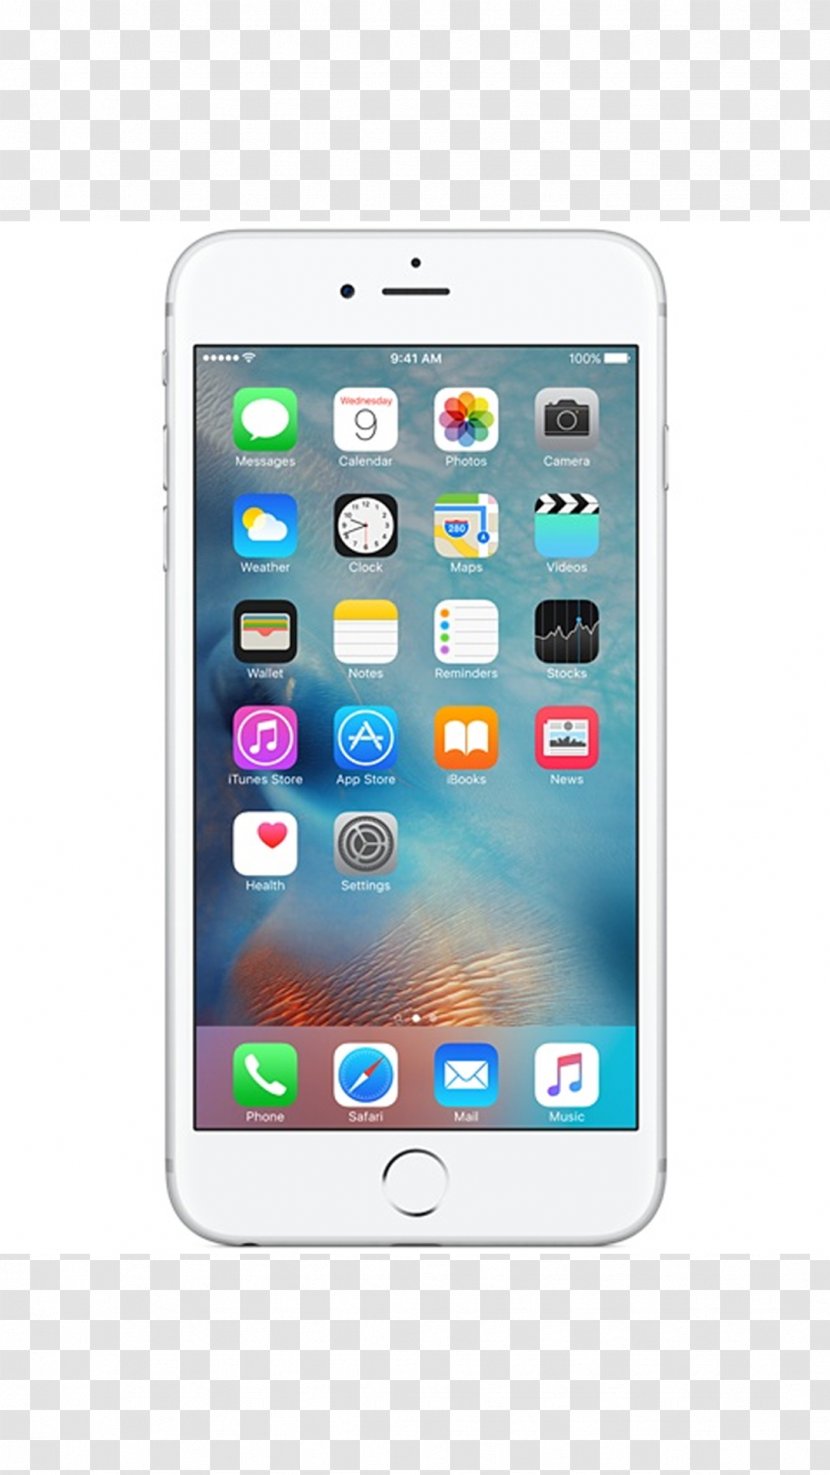 IPhone 6s Plus X 6 Apple - Mobile Phone - Iphone Transparent PNG